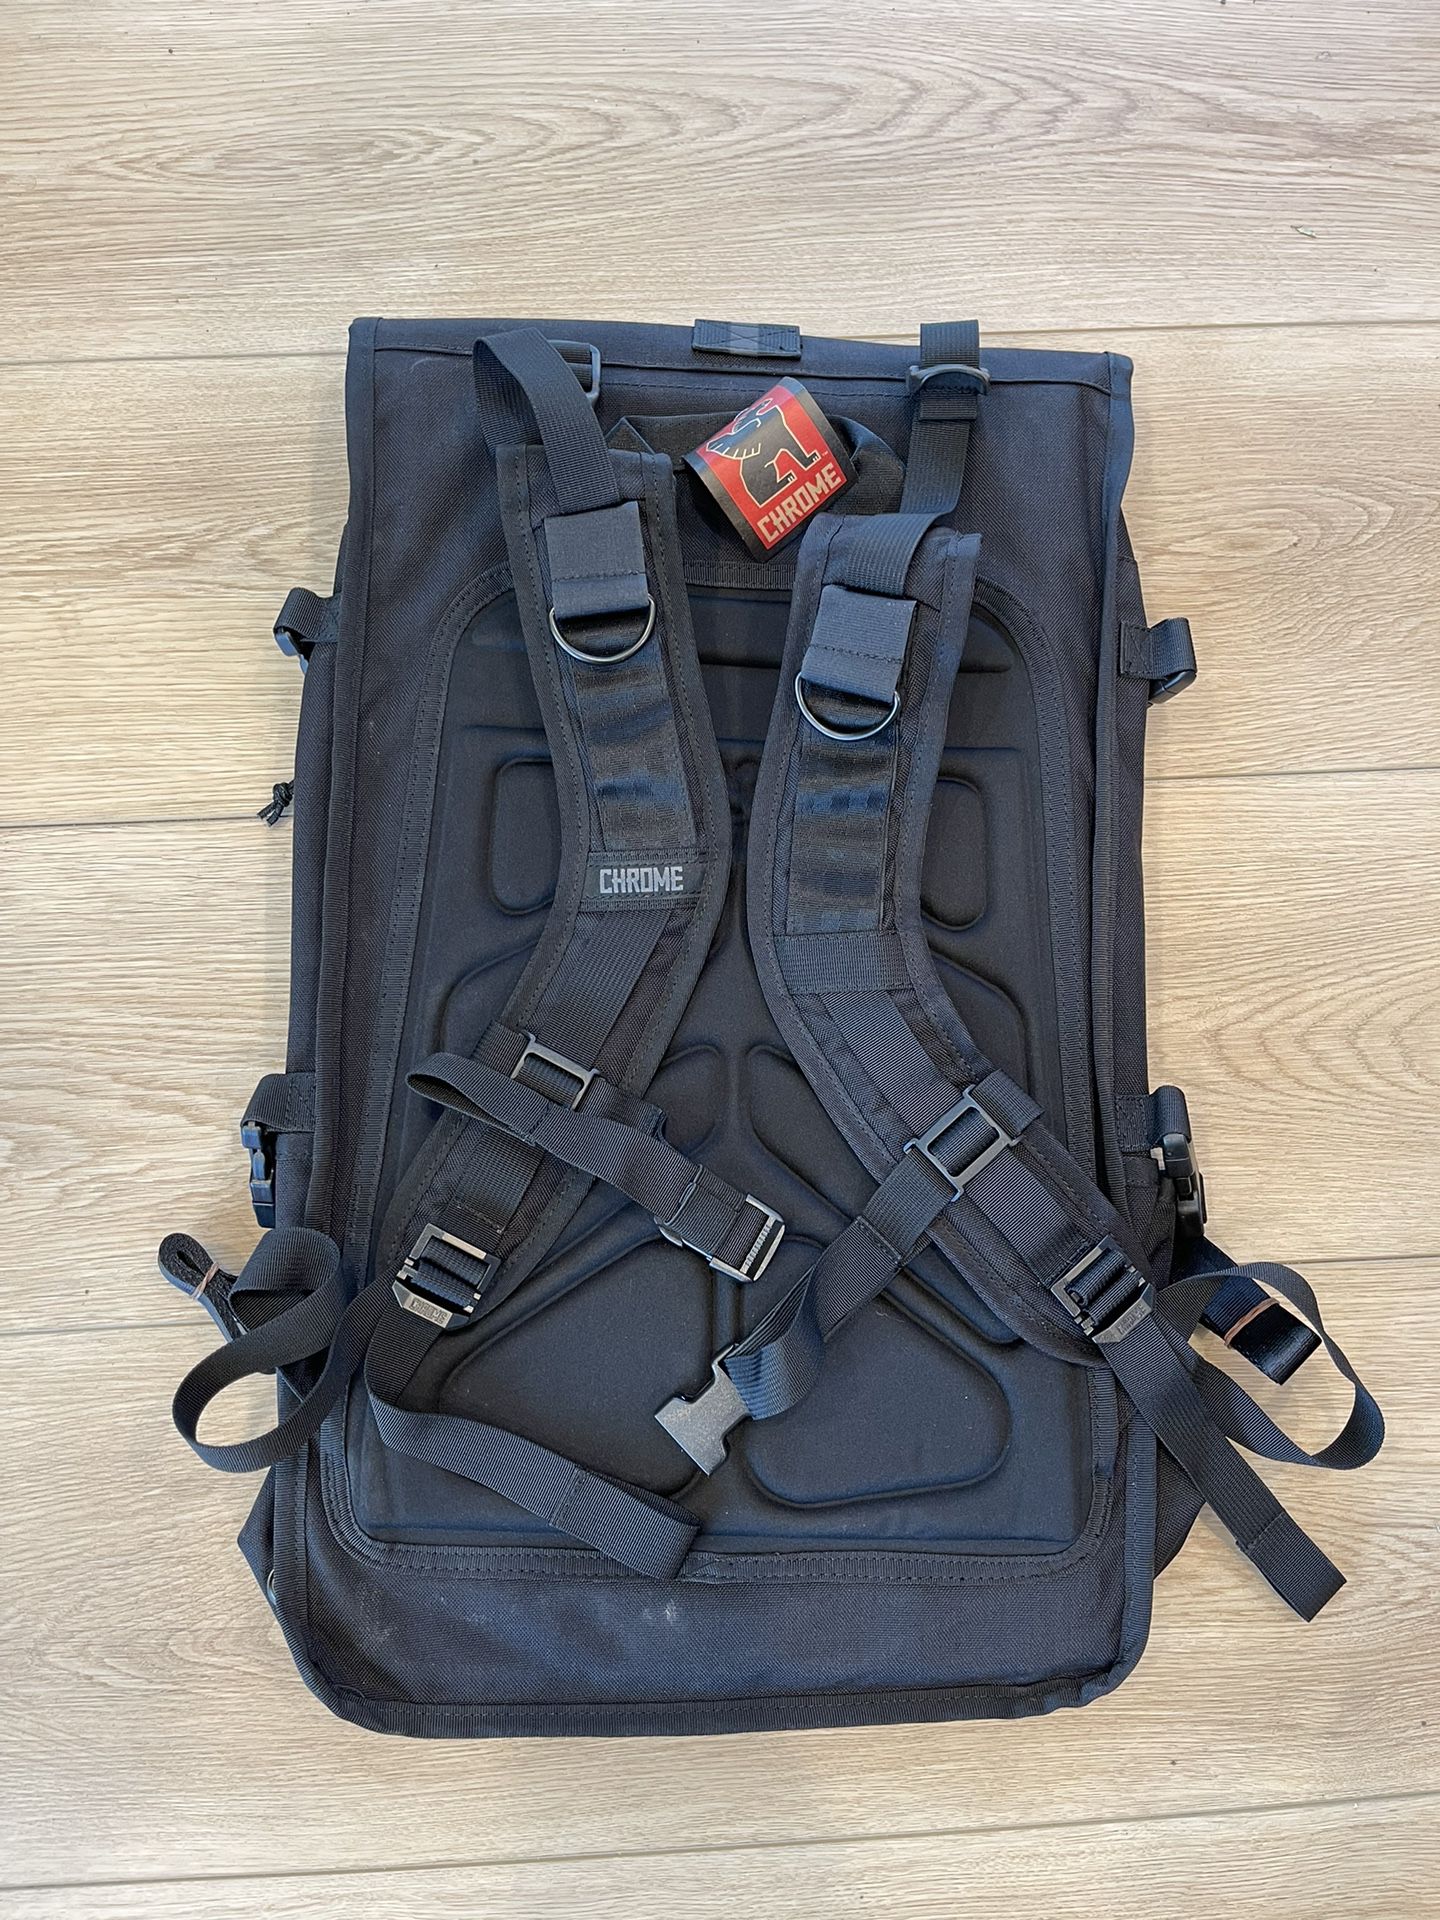 Chrome Industries Barrage Freight Backpack for Sale in Fullerton, CA ...